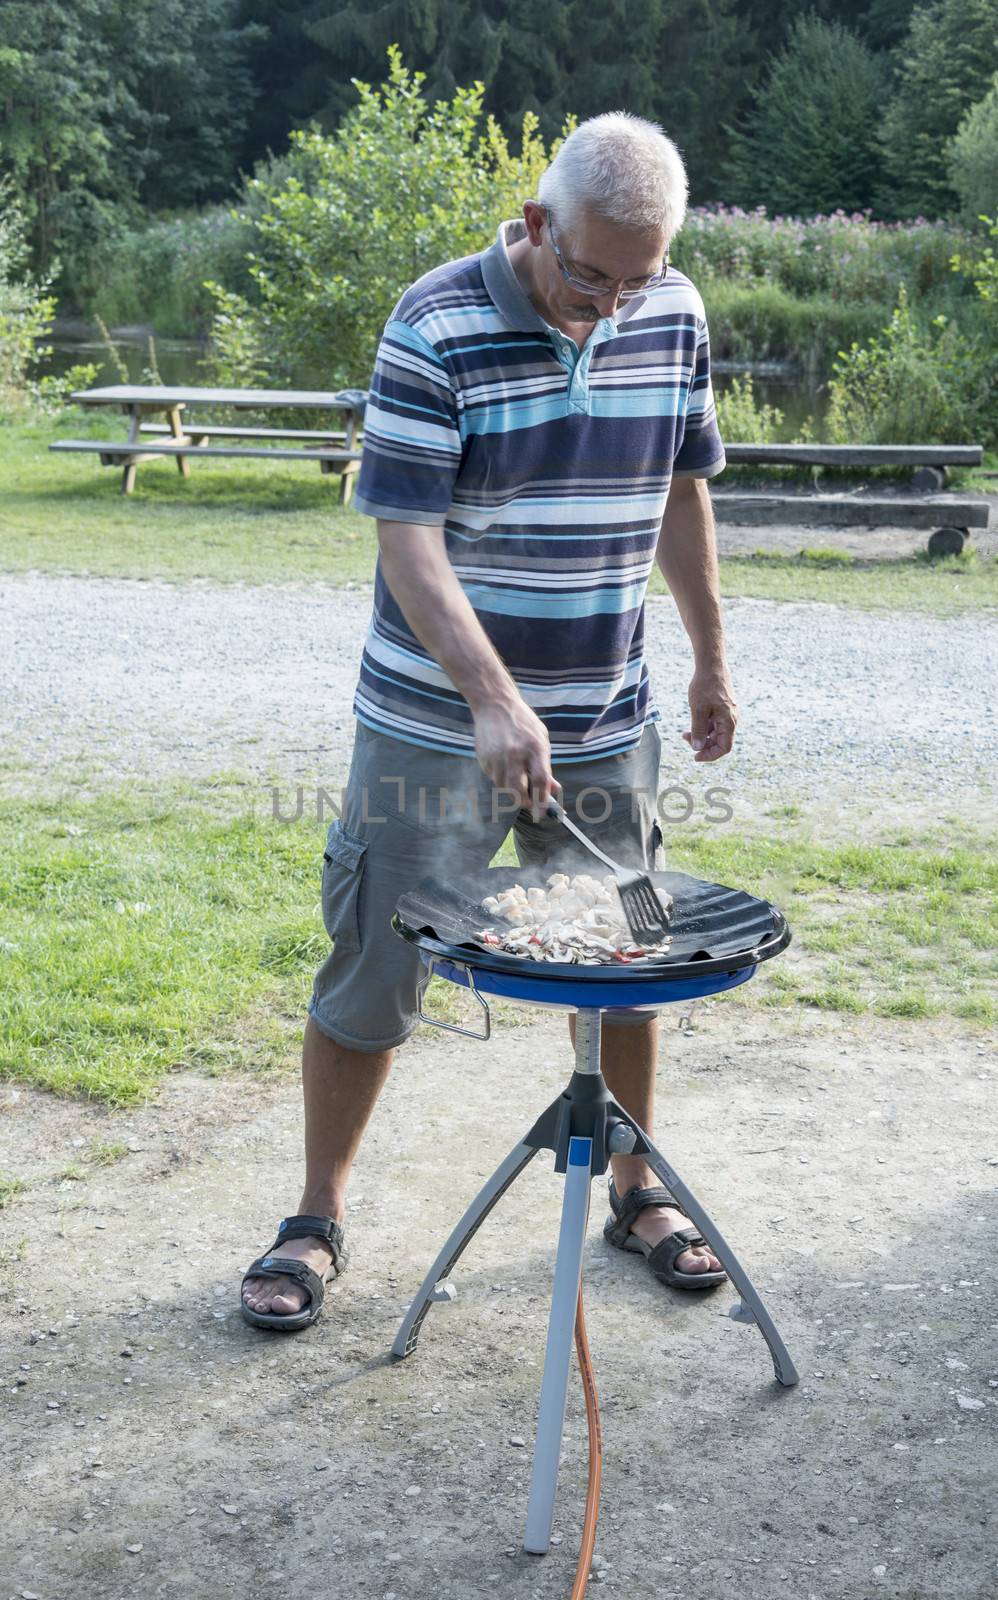 man coocking food with gas comfort on the camping